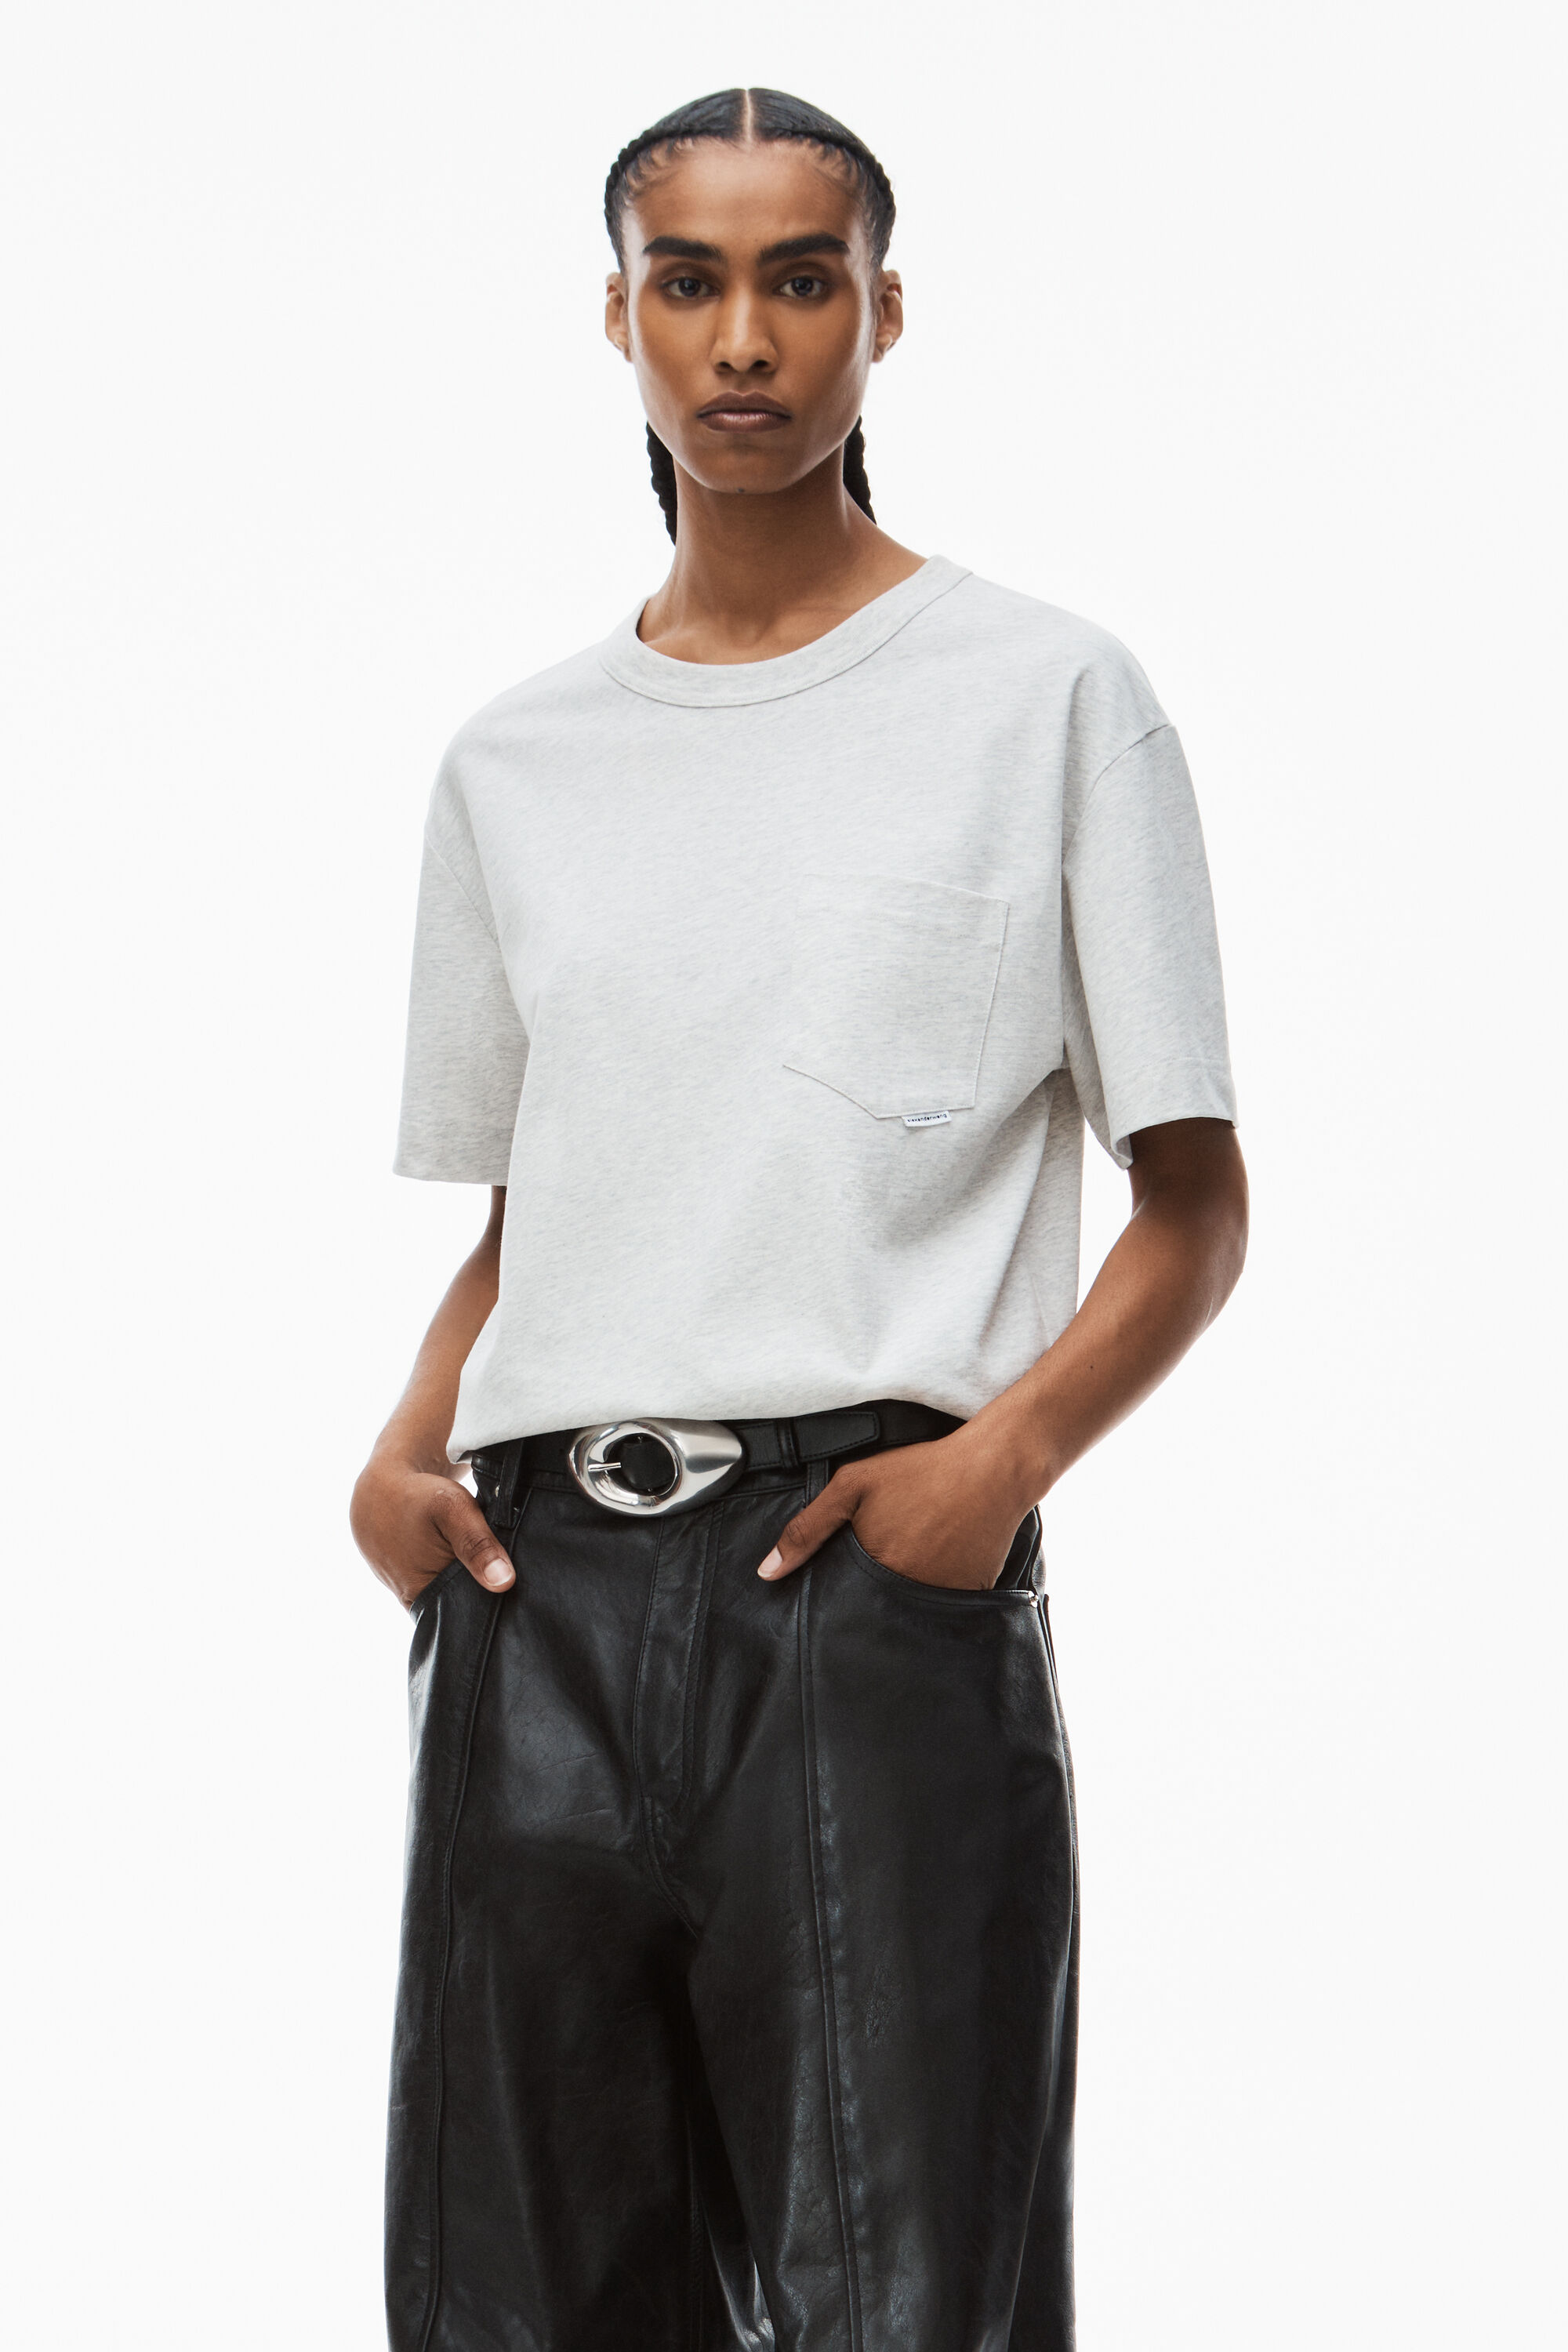 Alexander Wang Launches Second Collection with Uniqlo